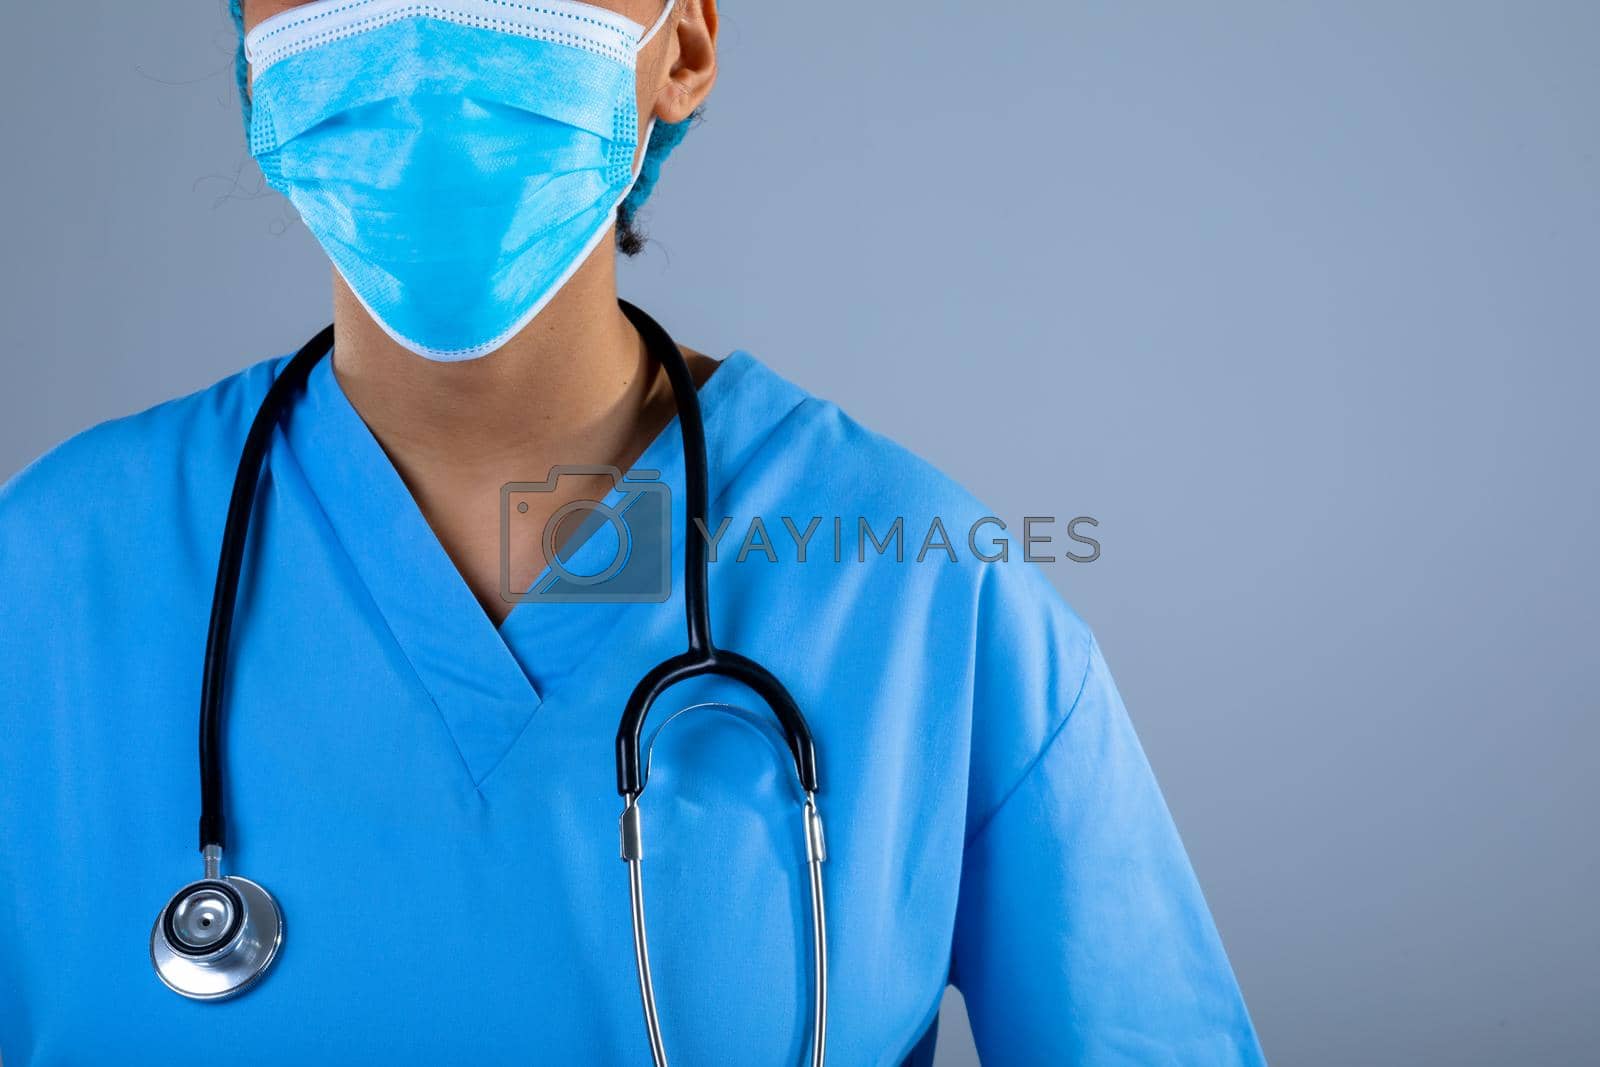 Royalty free image of Mid section of female surgeon wearing face mask against grey background by Wavebreakmedia